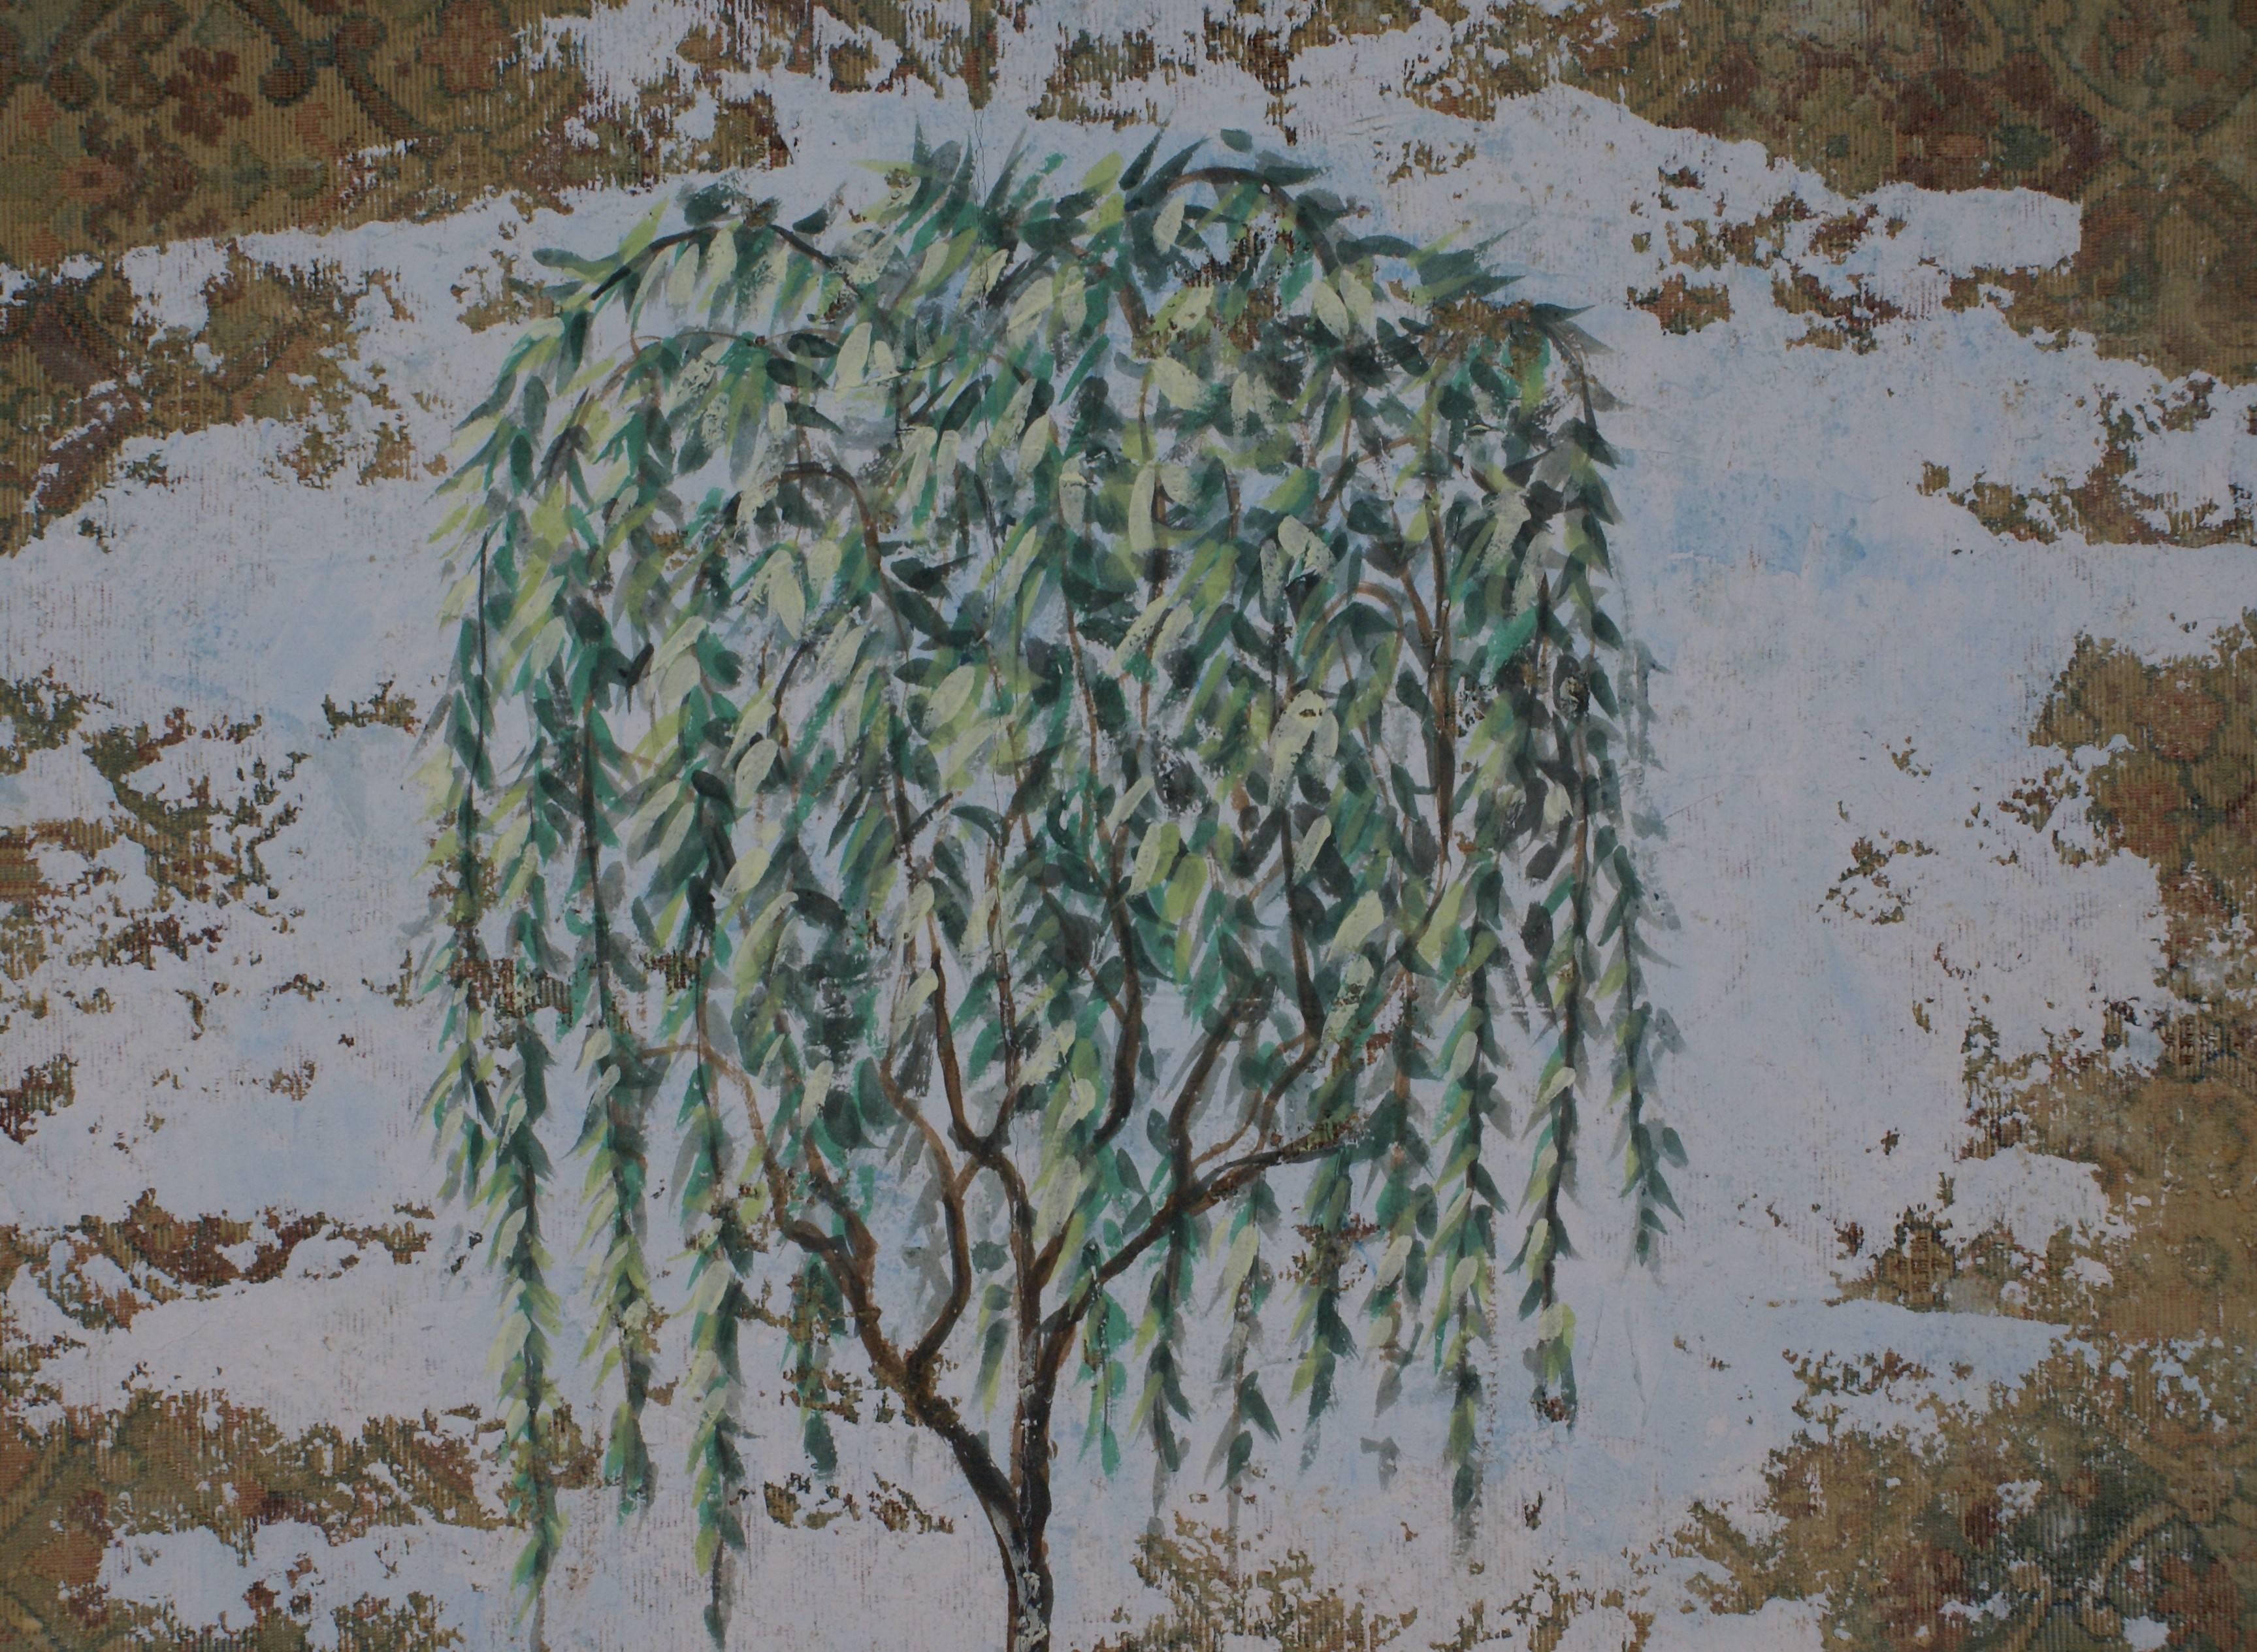 (The Willow} - Contemporary Mixed Media Art by Jacques Lamy